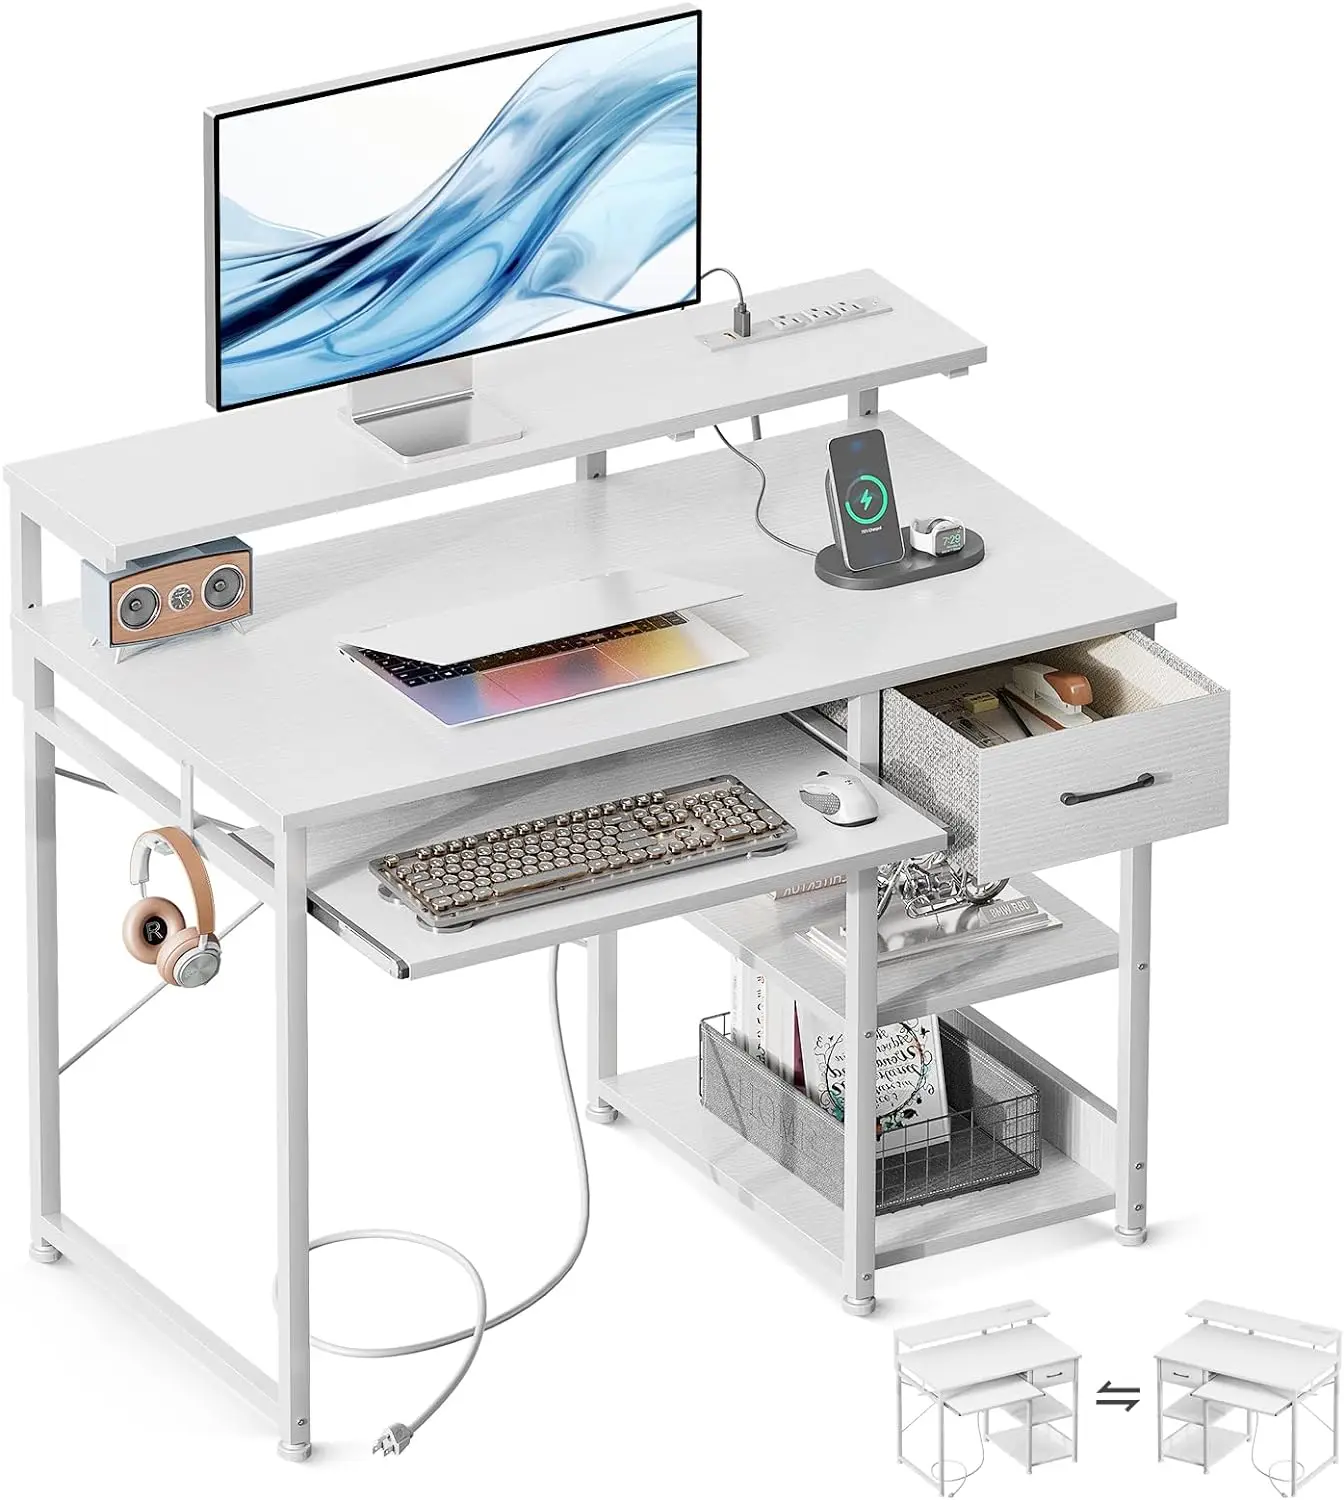 Small Computer Desk with Keyboard Tray, 40 Inch Office Desk with Power Outlet, Work Desk with Drawer, Reversible computer desk drawer orbit keyboard bracket slide rail hoisting crane rail bracket 2 guide rail